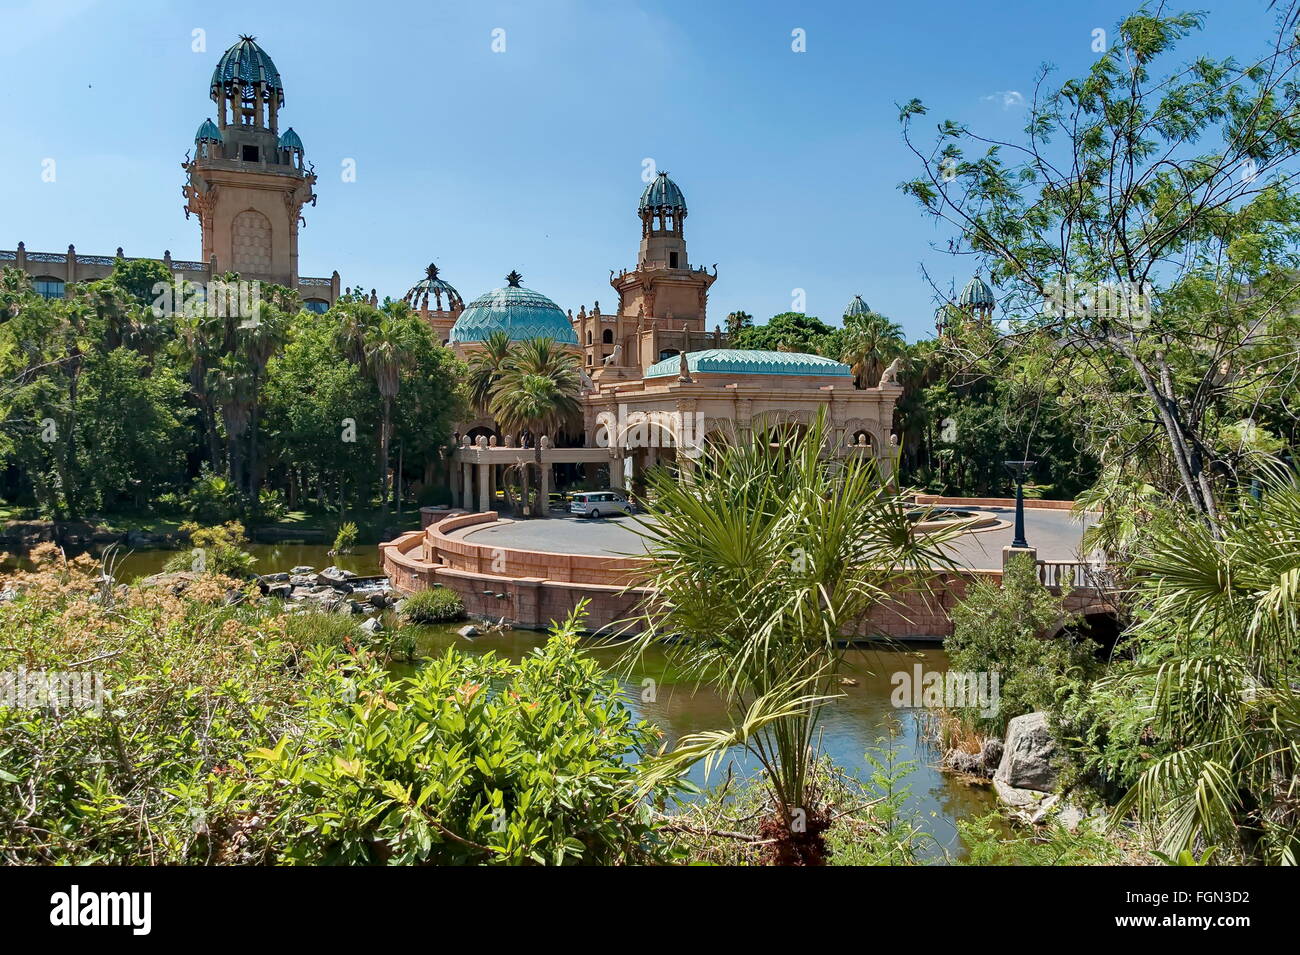 Palace of the Lost City hotel in Sun City, South Africa Stock Photo